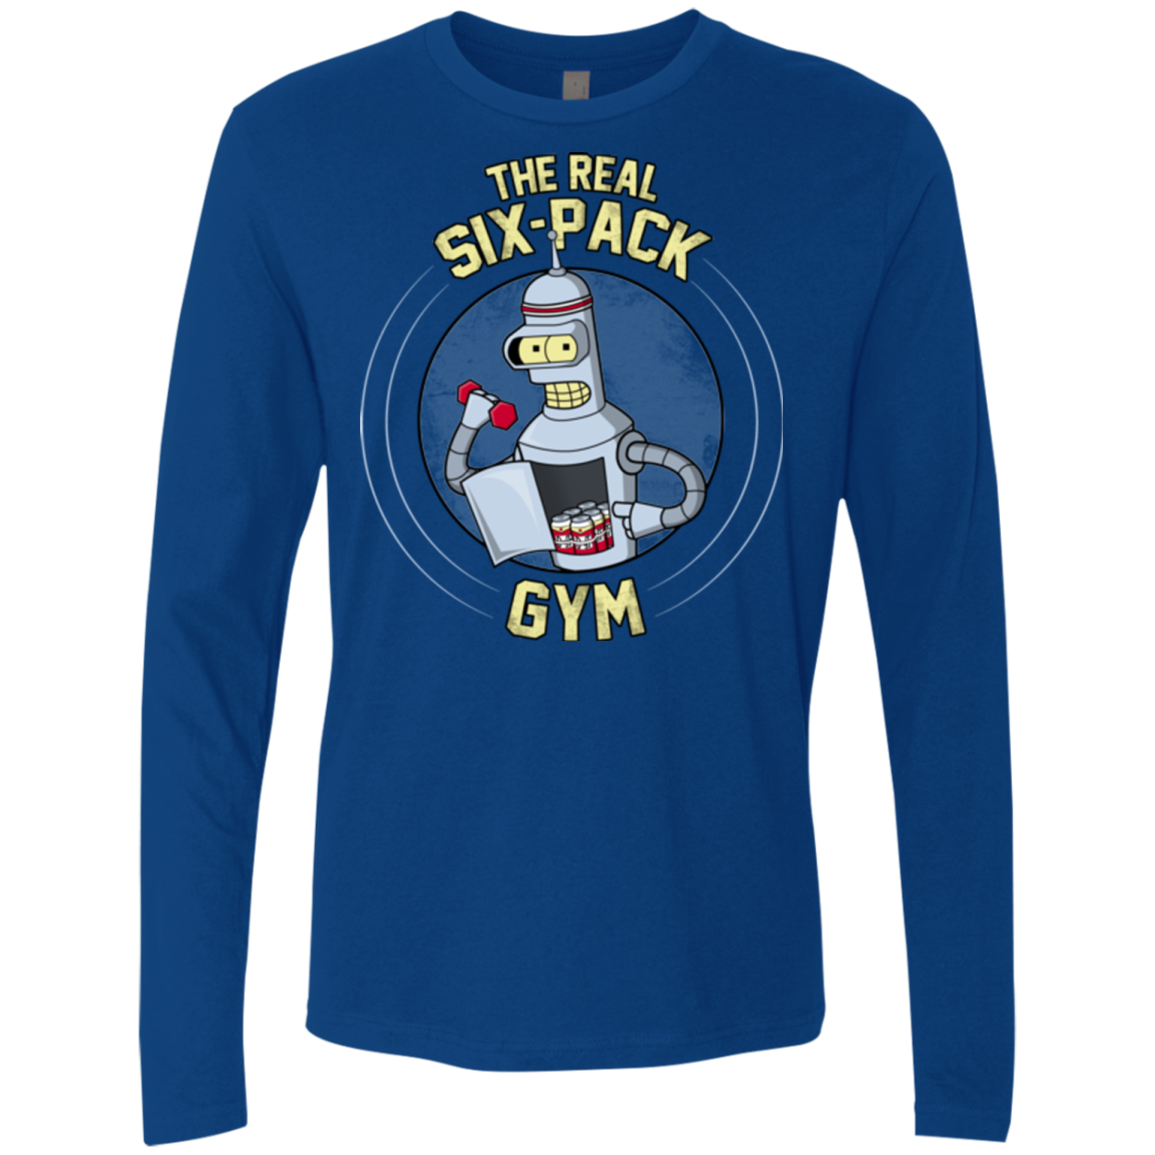 The Real Six Pack Men's Premium Long Sleeve